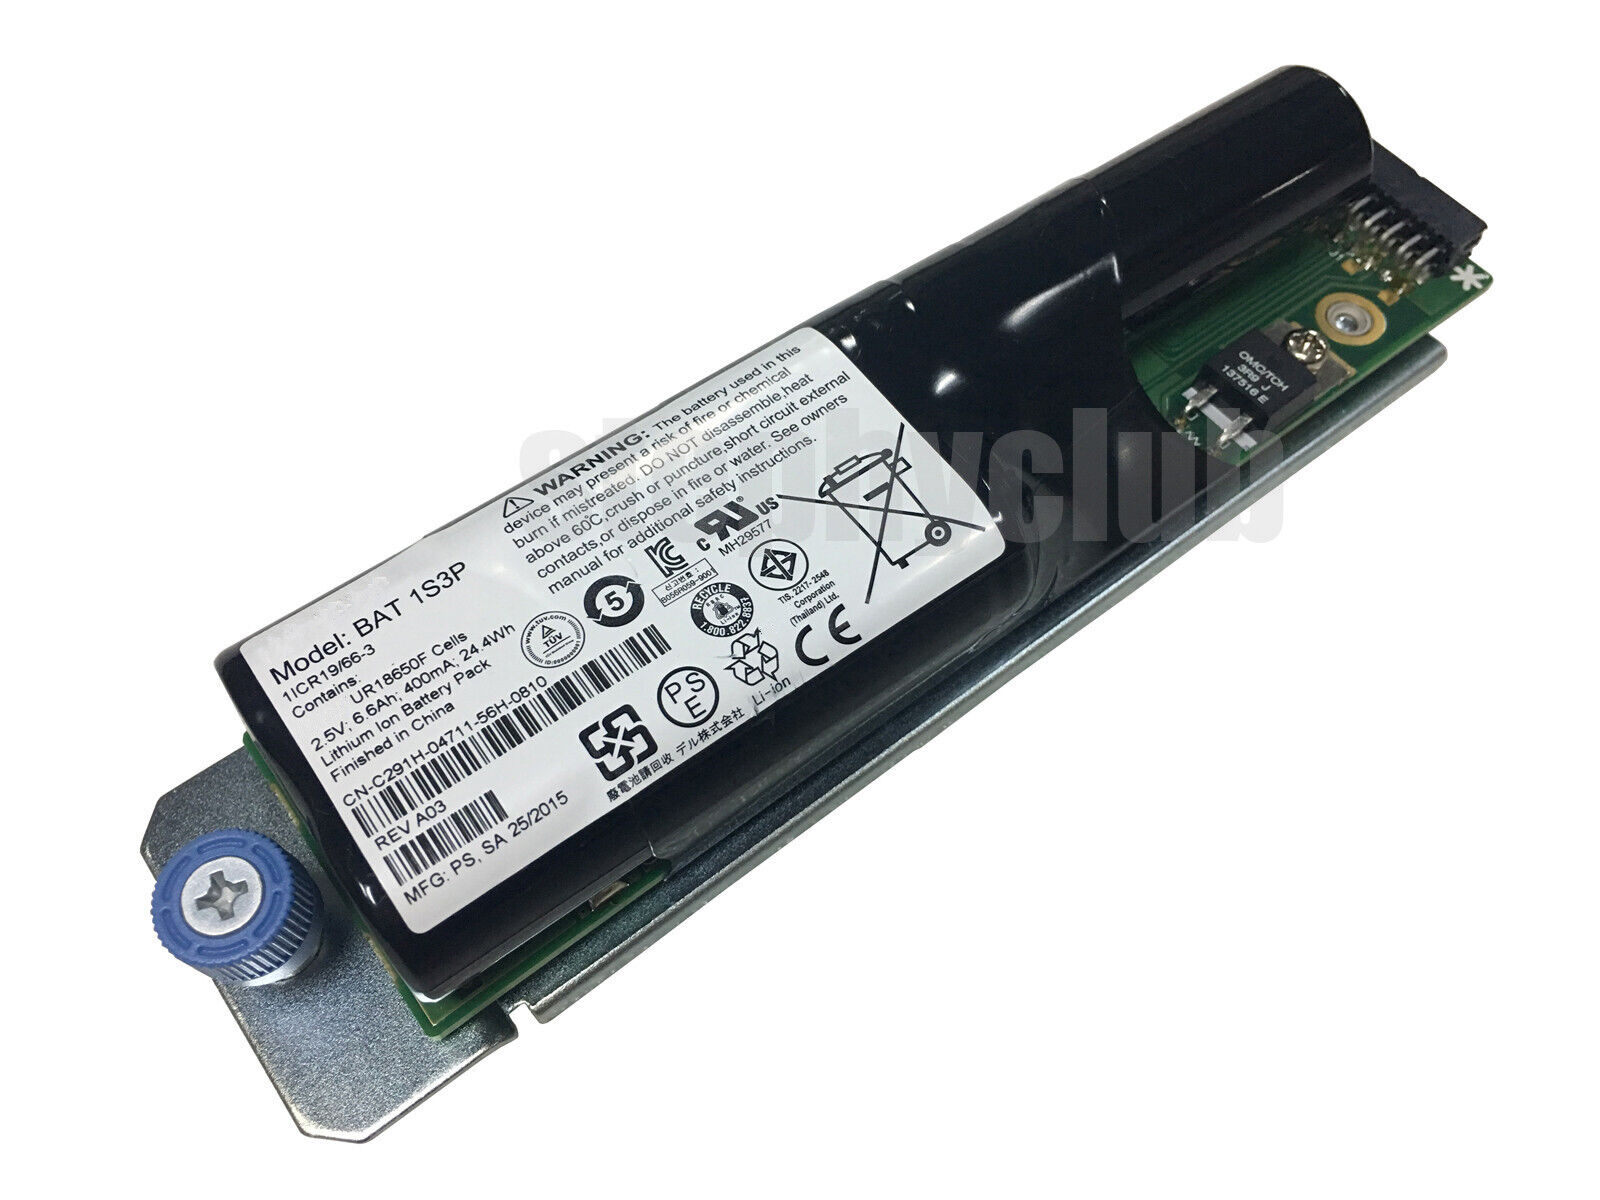 New BAT 1S3P Battery Fits for Dell Raid Controller Backup PowerVault MD3000iBAT